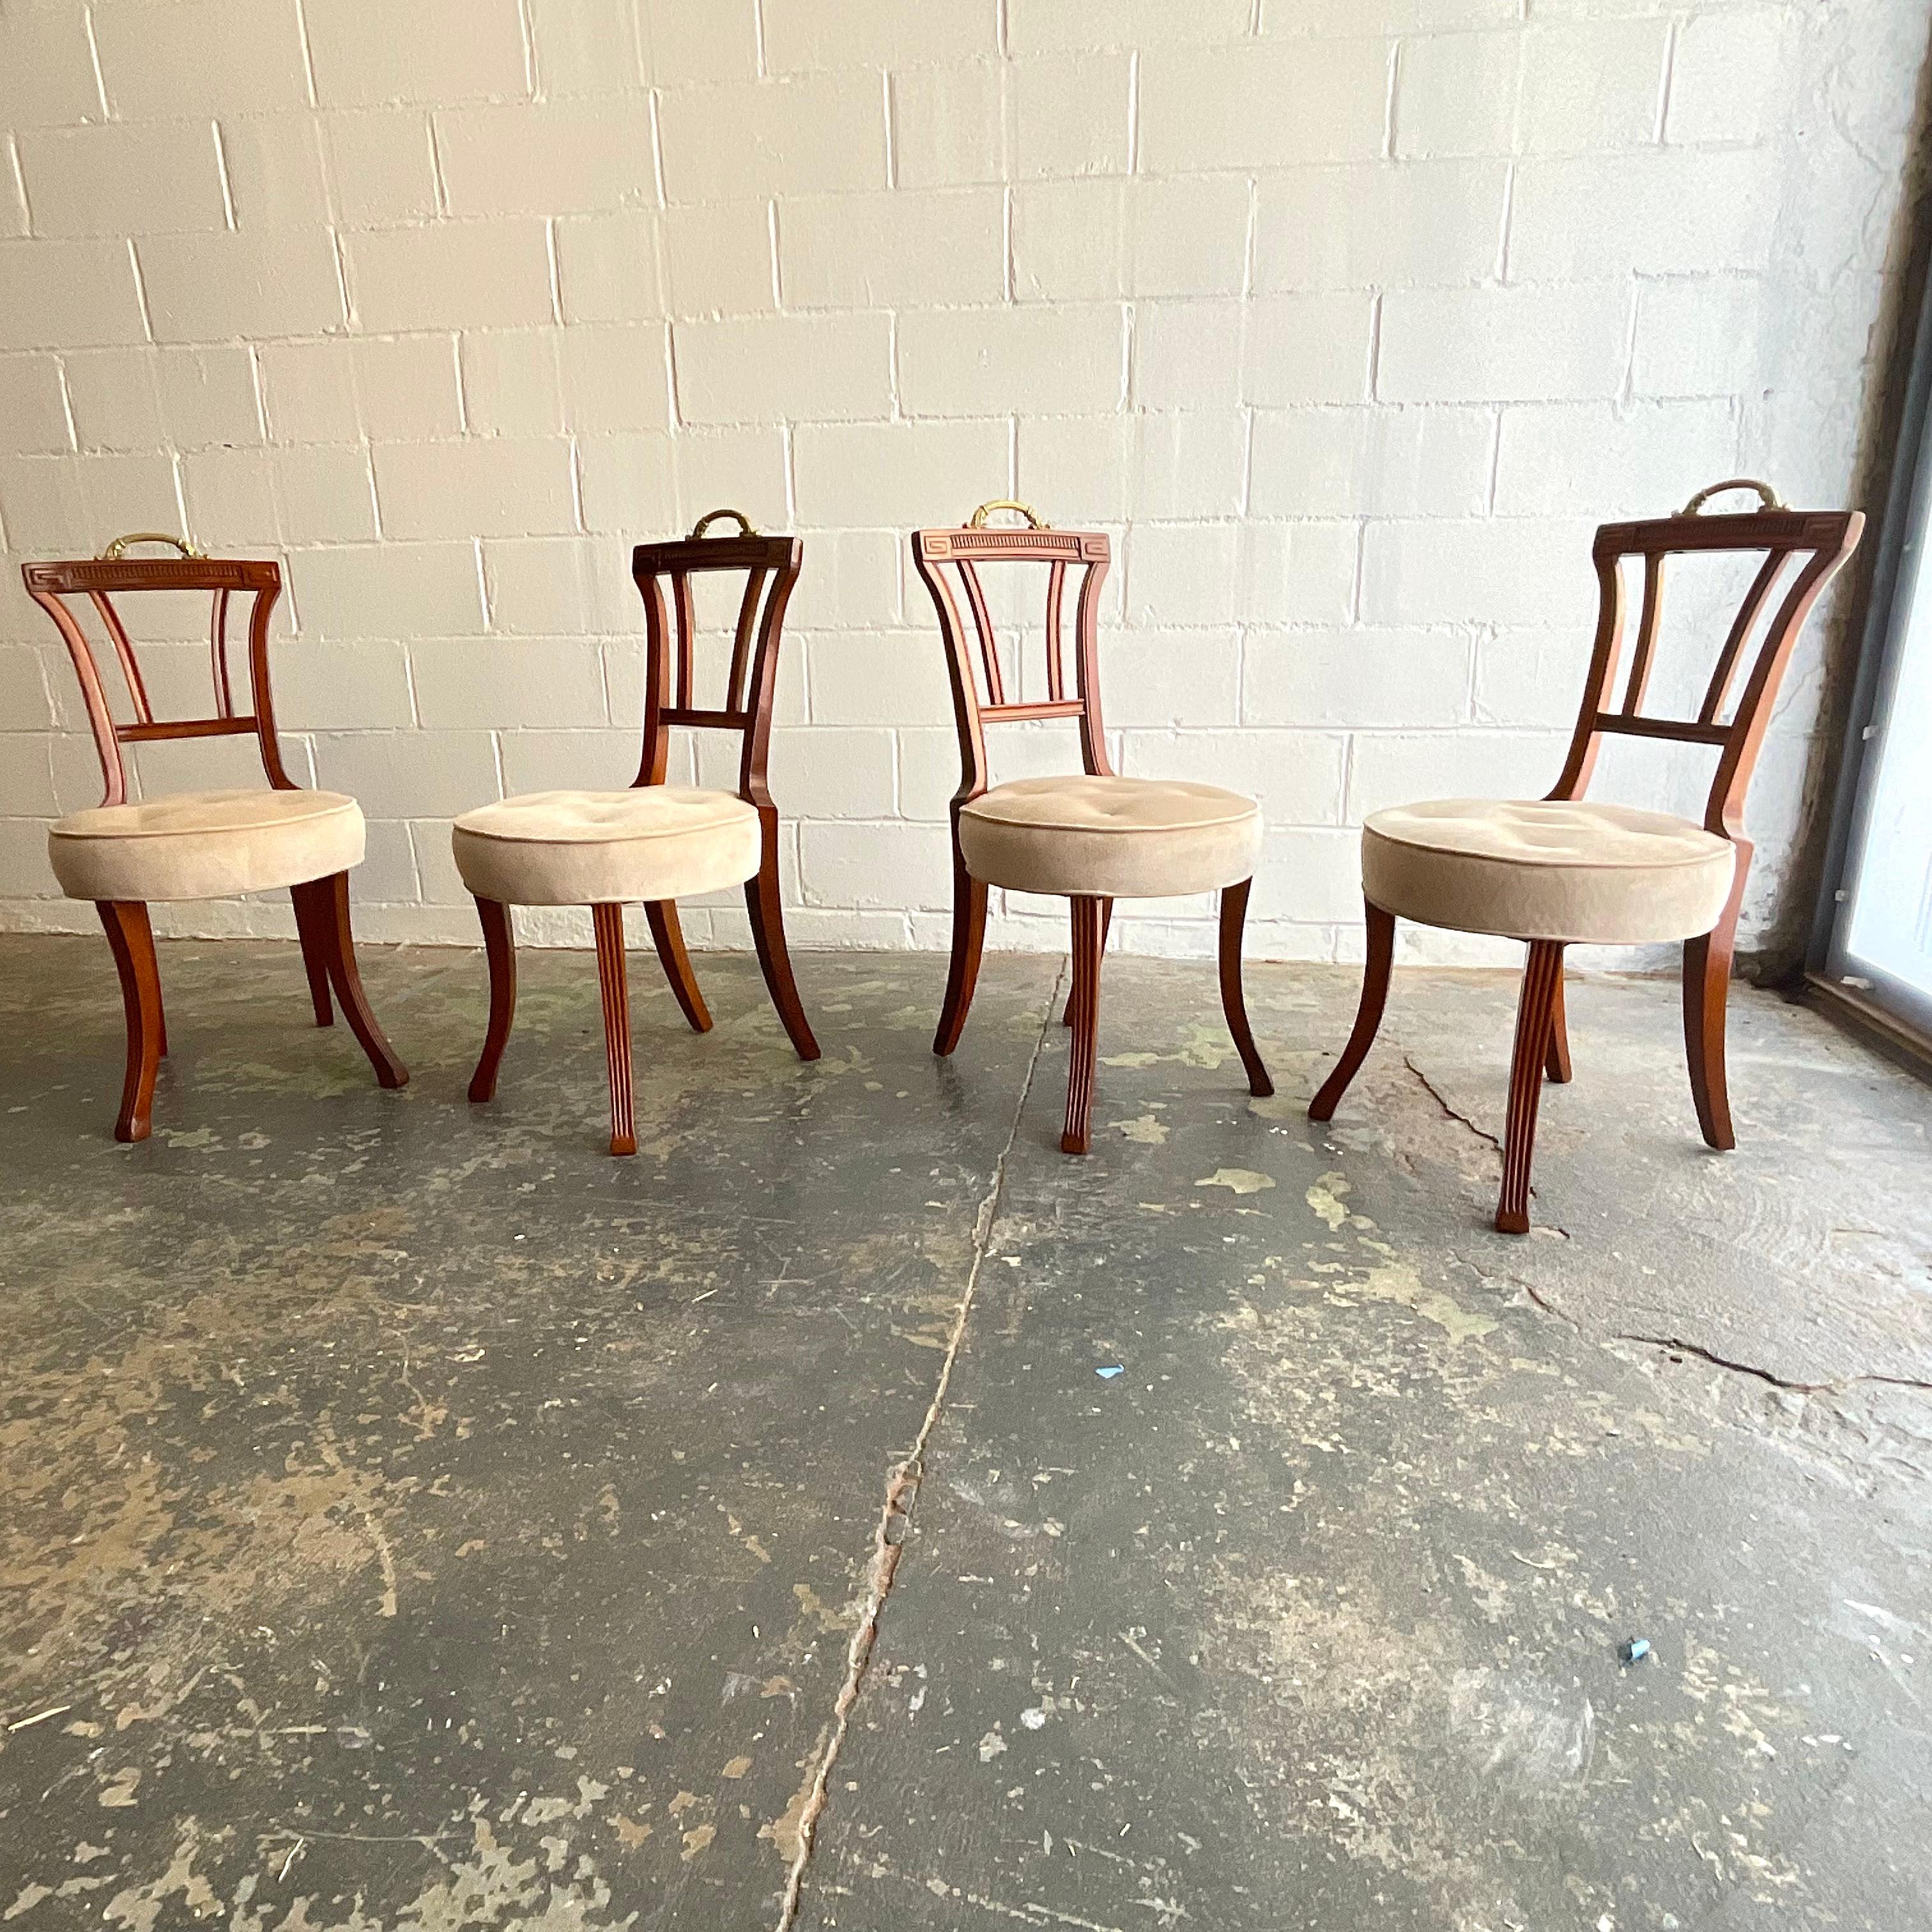 Petite yet comfortable set of four dining or side chairs in wonderfully patinated mahogany with original brass handles. This design features fluted front saber legs with Greek classical motif carved crest rail, and traditional spring stuffed seats.